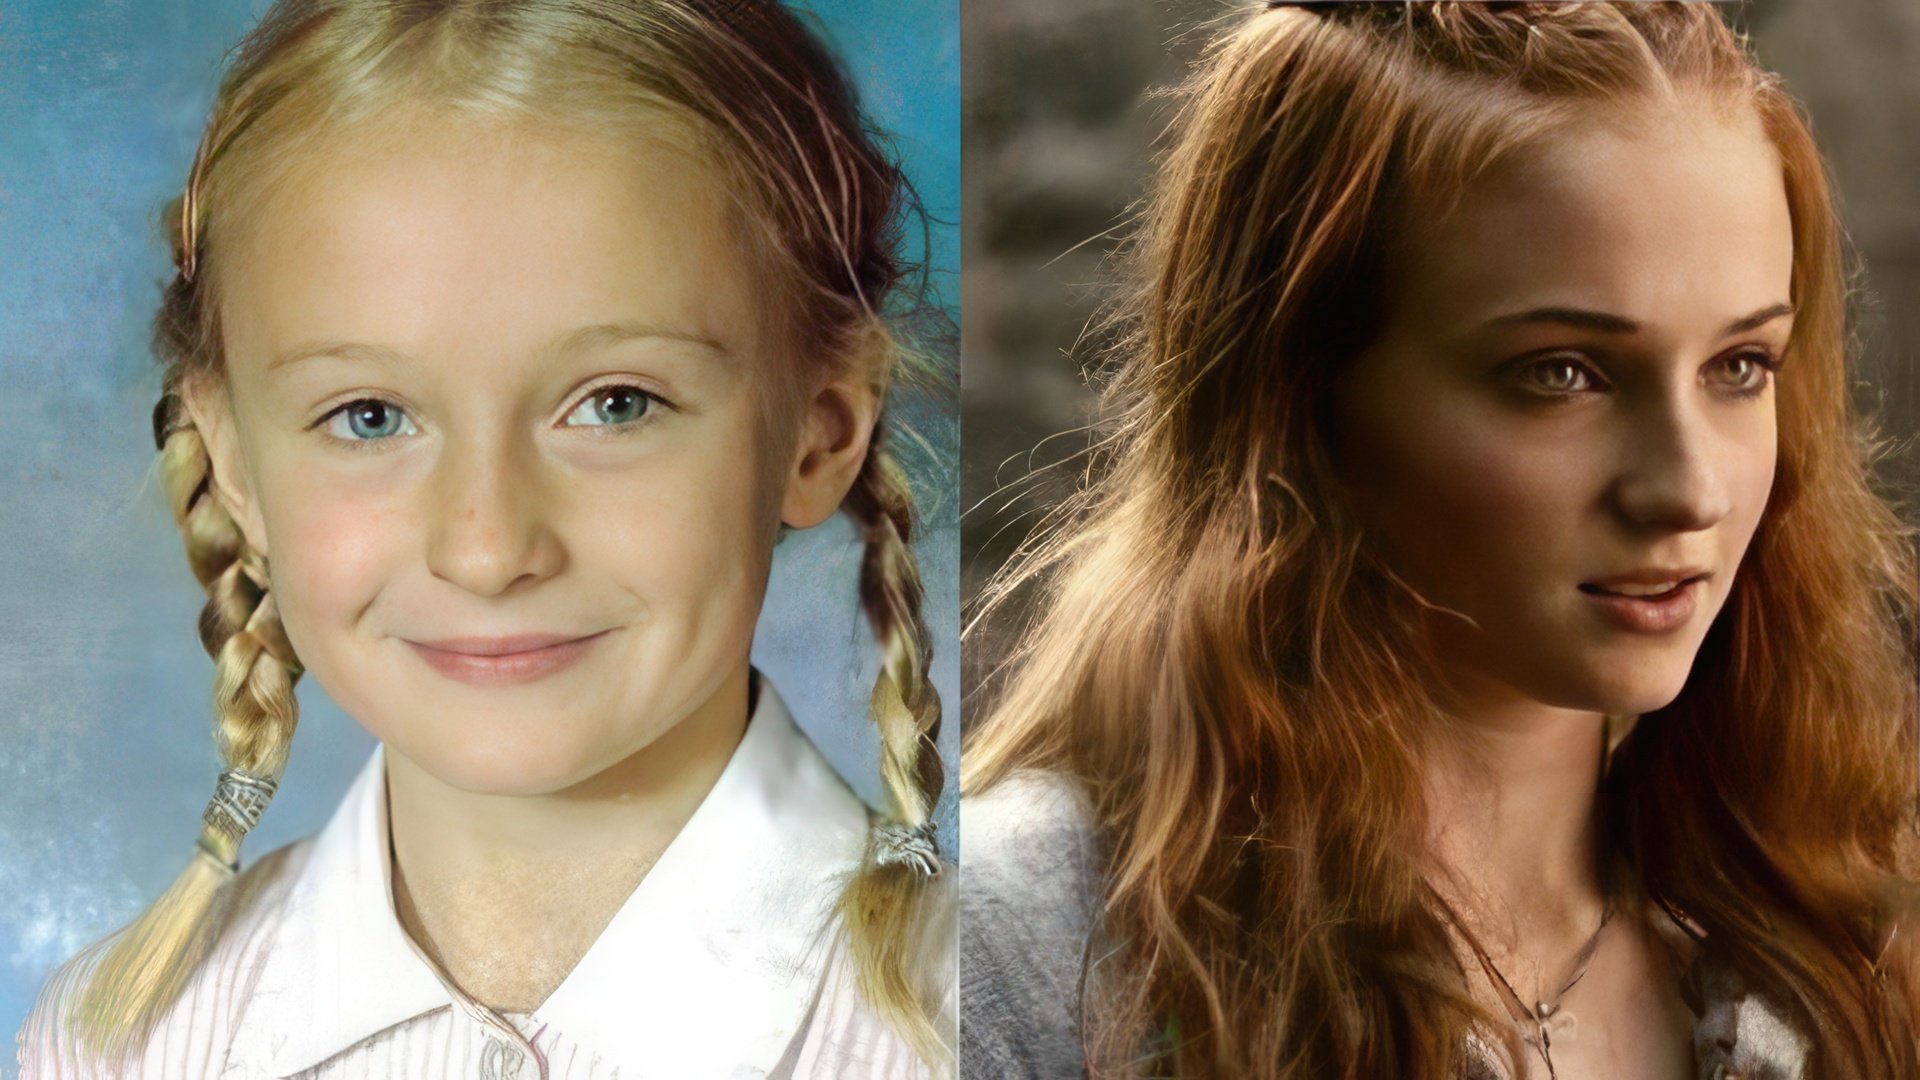 Sophie Turner in her childhood and now